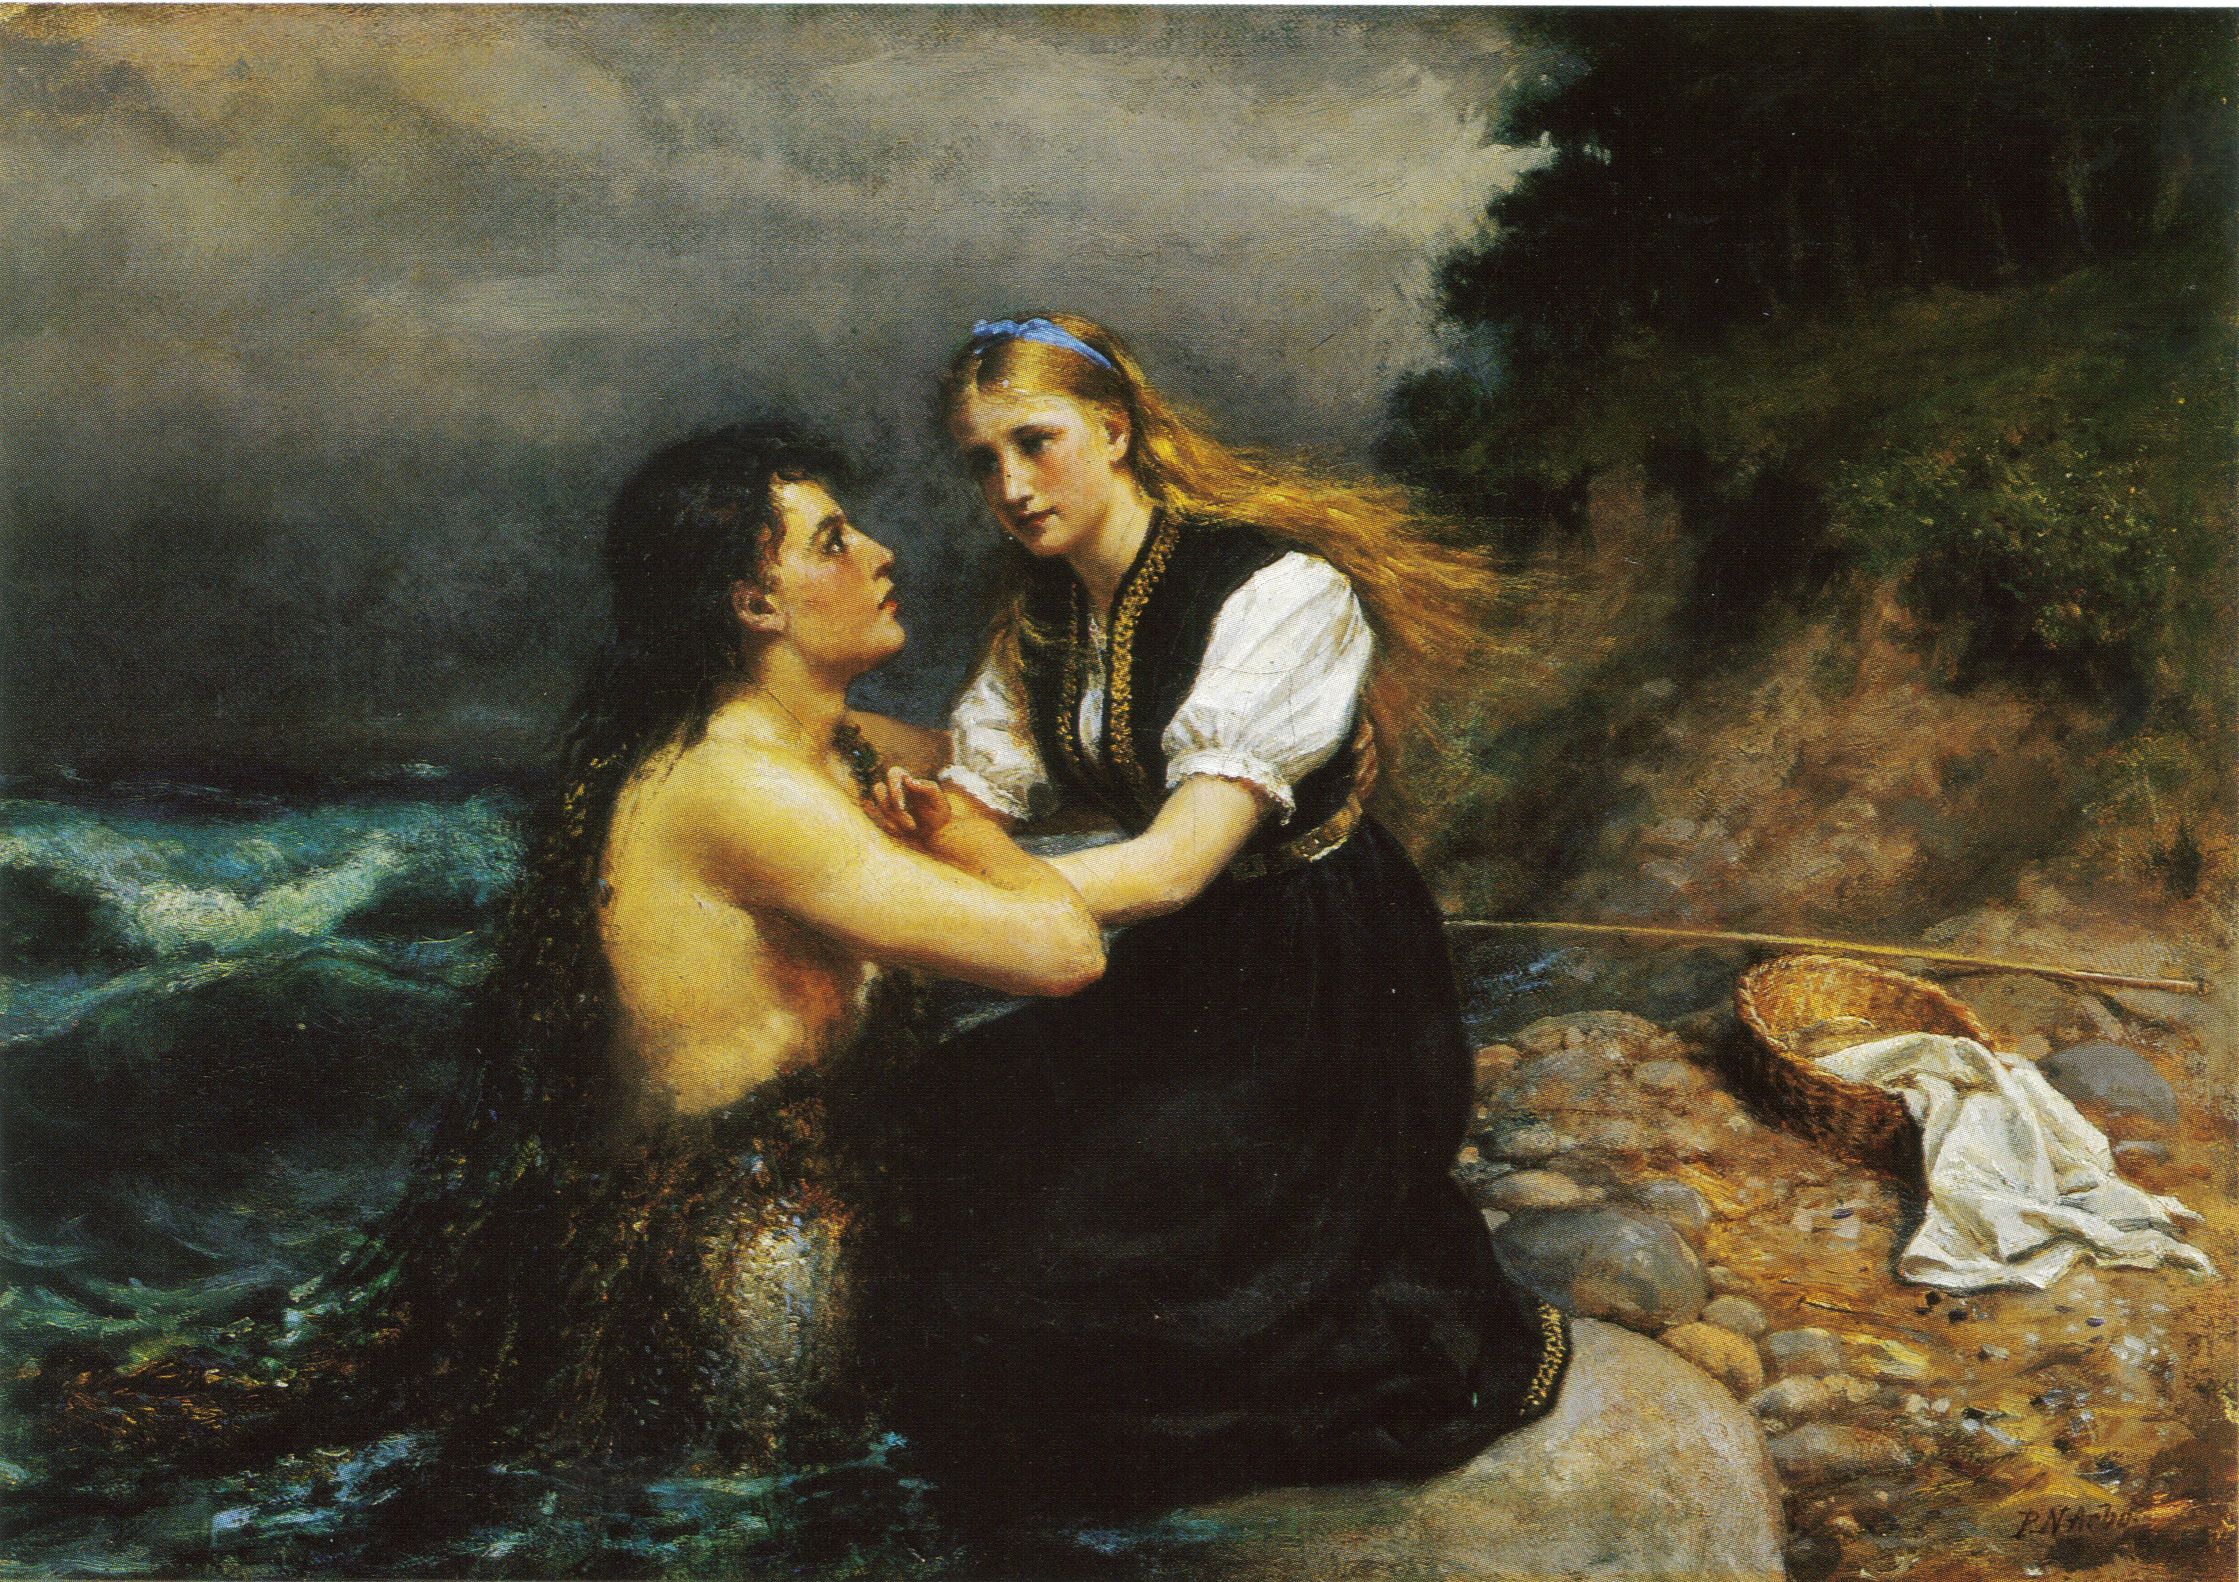 A couple stare at each other, one sitting on the land and the other in the water.